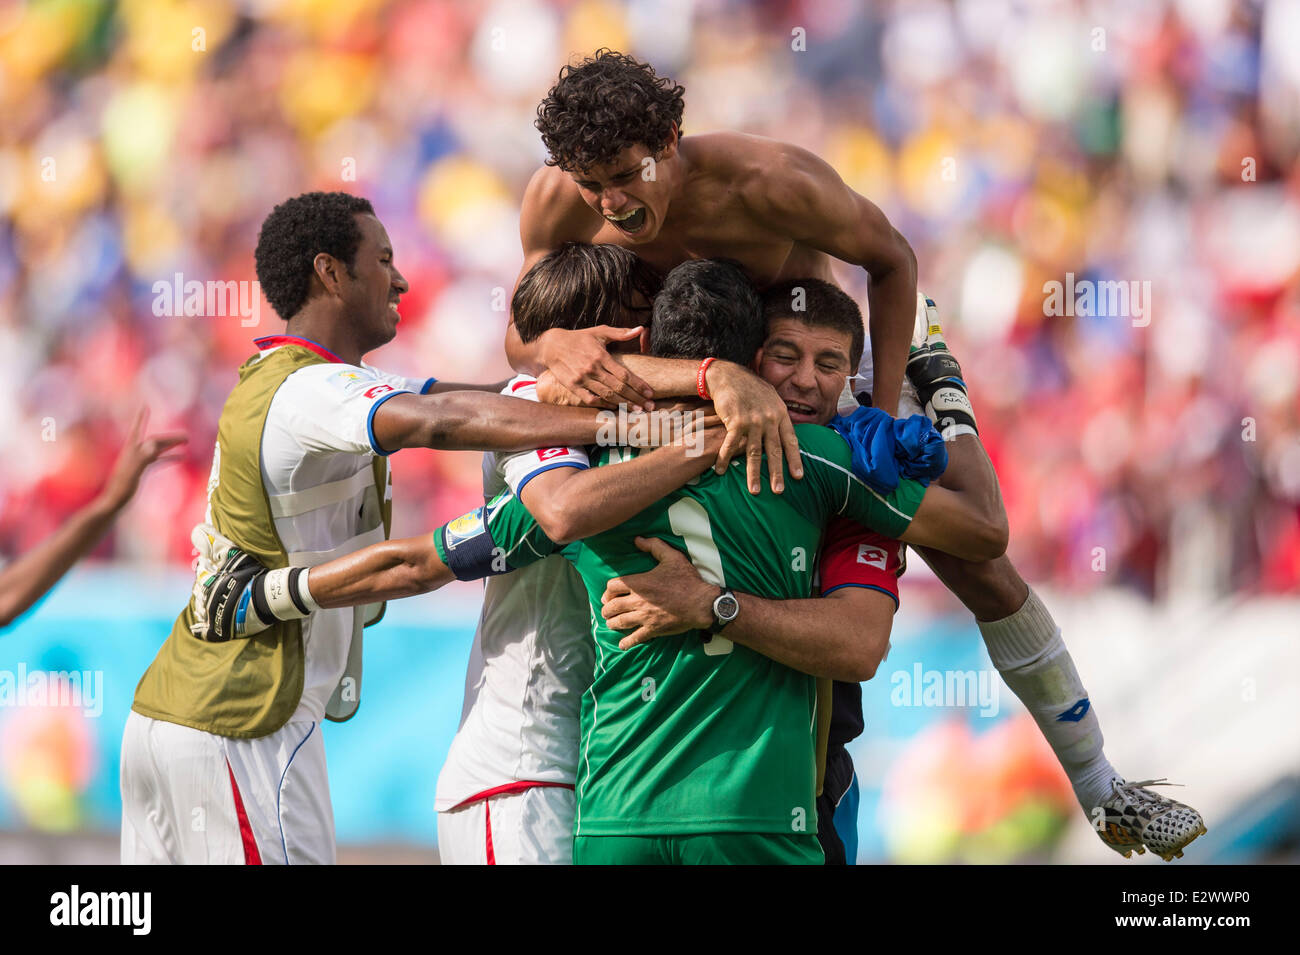 Recife, Brazil. 20th June, 2014. Costa Rica team group (CRC) Football/Soccer : Yeltsin Tejeda of Costa Rica celebrates after winning the FIFA World Cup Brazil 2014 Group D match between Italy 0-1 Costa Rica at Arena Pernambuco in Recife, Brazil . Credit:  Maurizio Borsari/AFLO/Alamy Live News Stock Photo